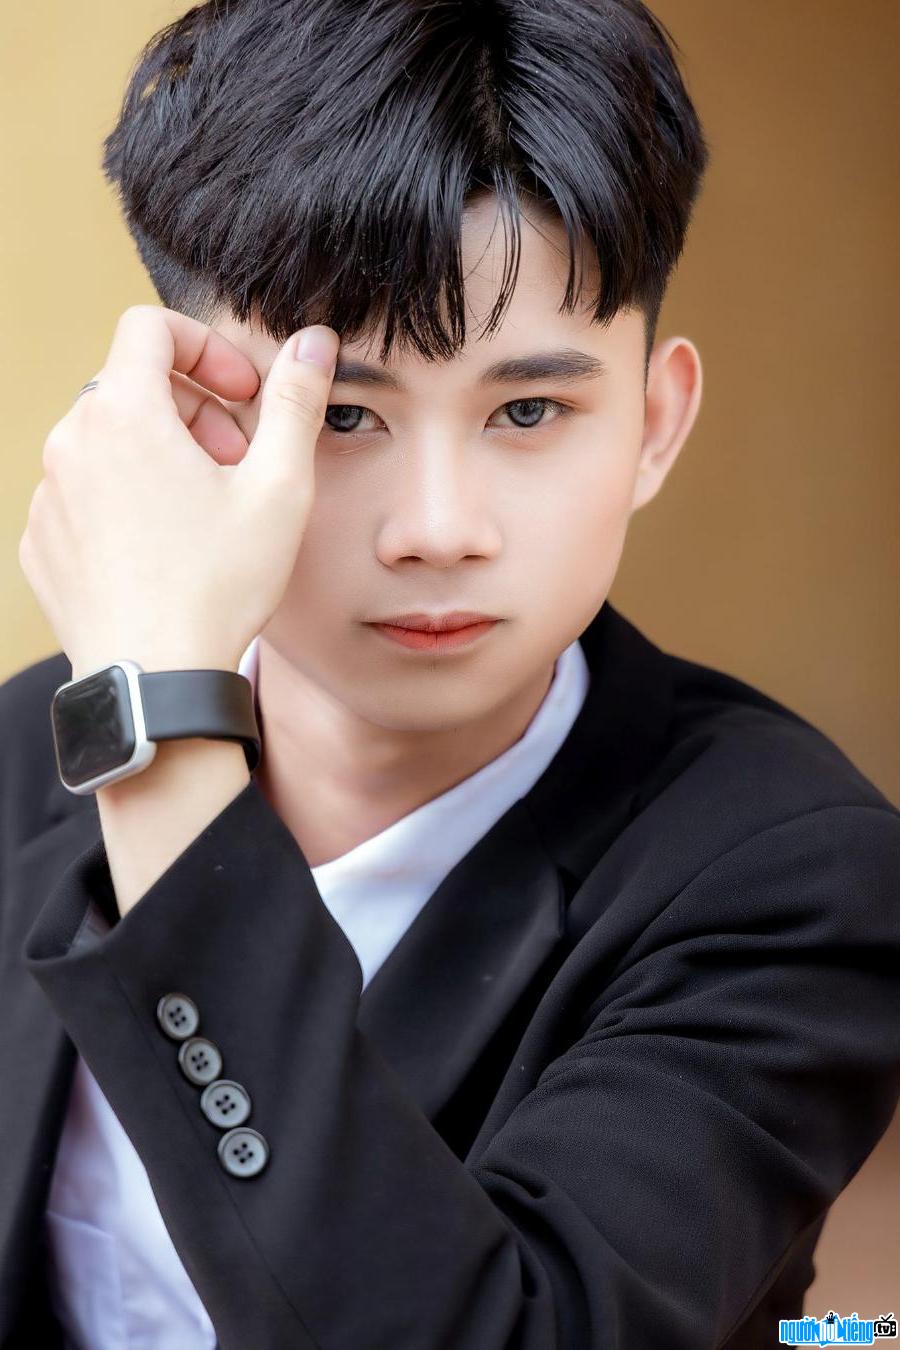  Hoang Van owns a handsome and romantic face